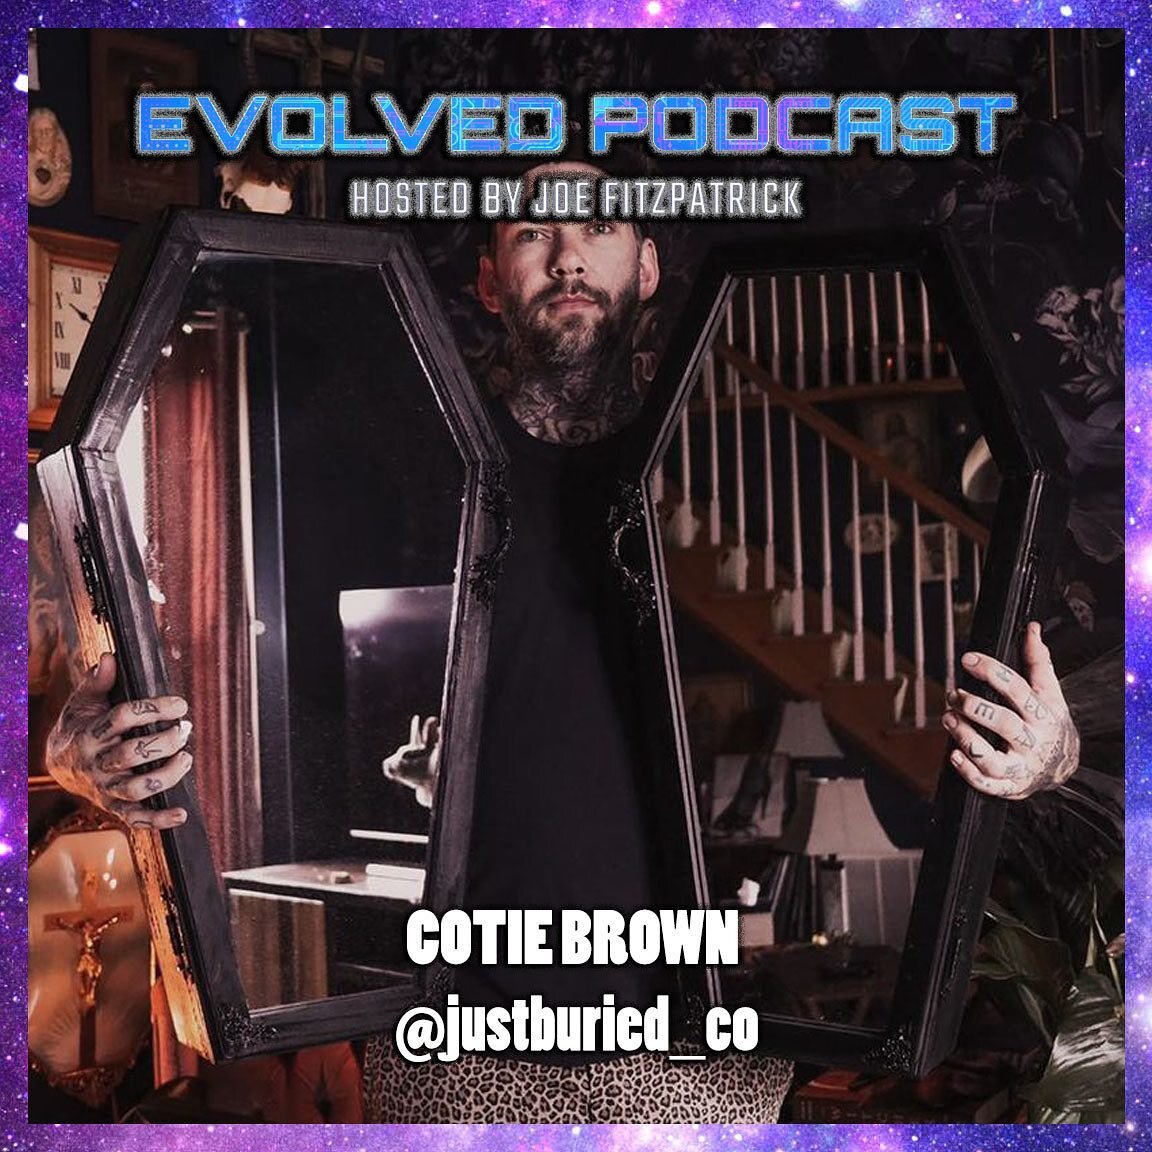 DON&rsquo;T GET MAD, GET BUSY: COTIE BROWN @justburied_co AND WIFE KIMBER CREATE &ldquo;THE FINER THINGS IN DEATH&rdquo; | EP. 015

Cotie Brown is the co-owner and operator of Just Buried Co. Masters of the Macabre, husband and wife duo Cotie and Kim